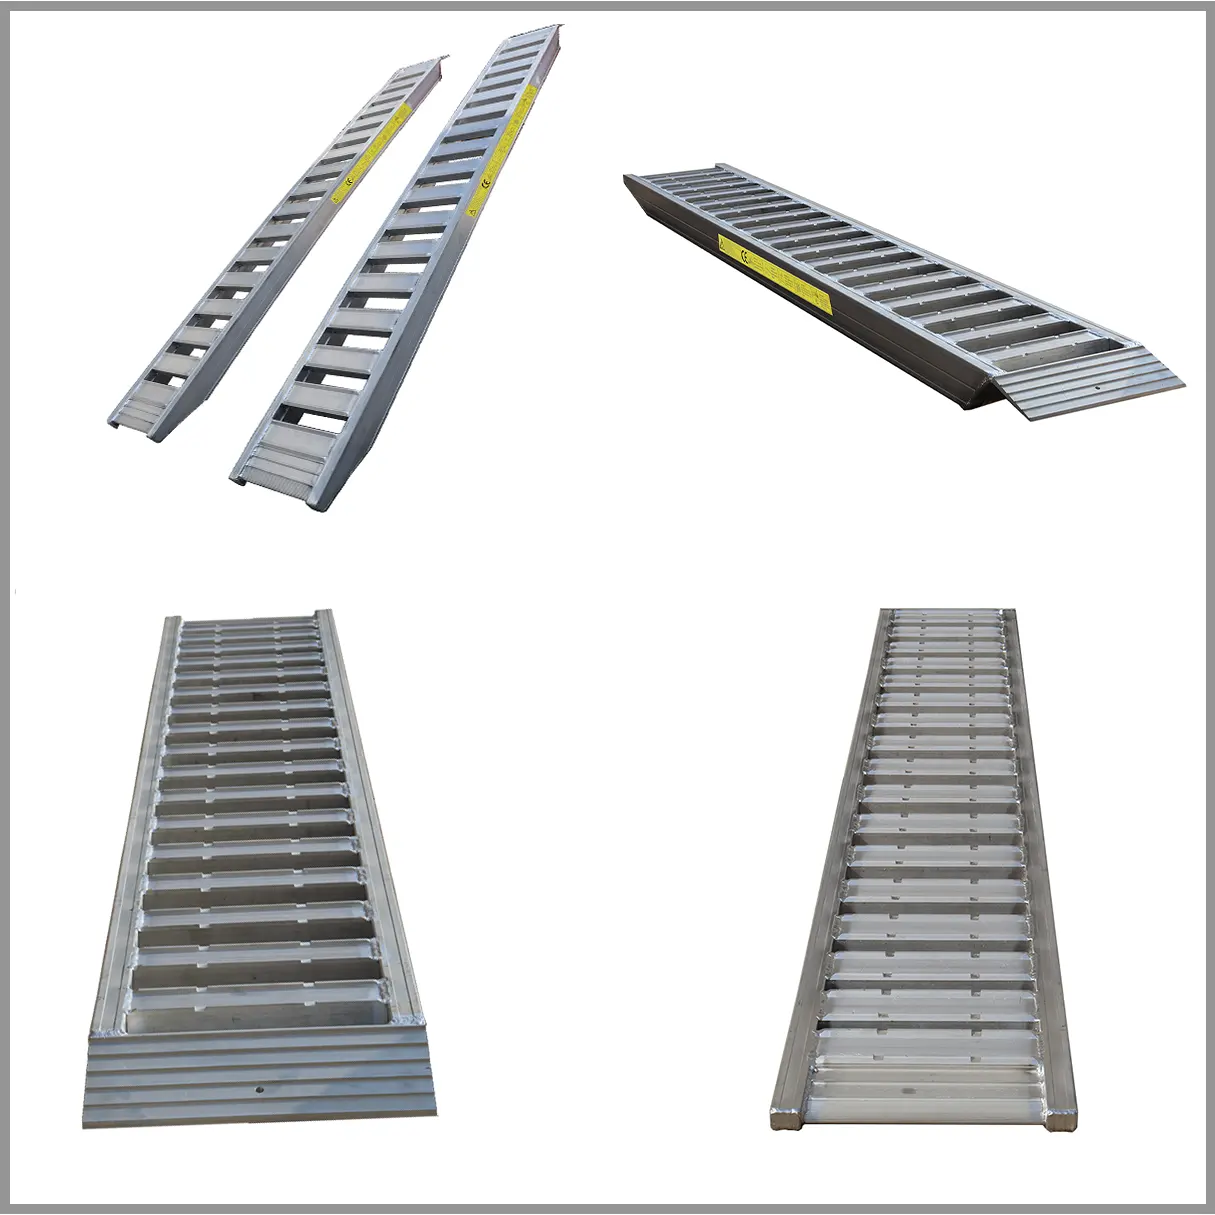 Lightweight Atv Ramps Aluminum 3 Meter 5 Ton Loading Ramps For Pickup Truck Ramps Heavy Duty excavators with capacity 5ton/pair